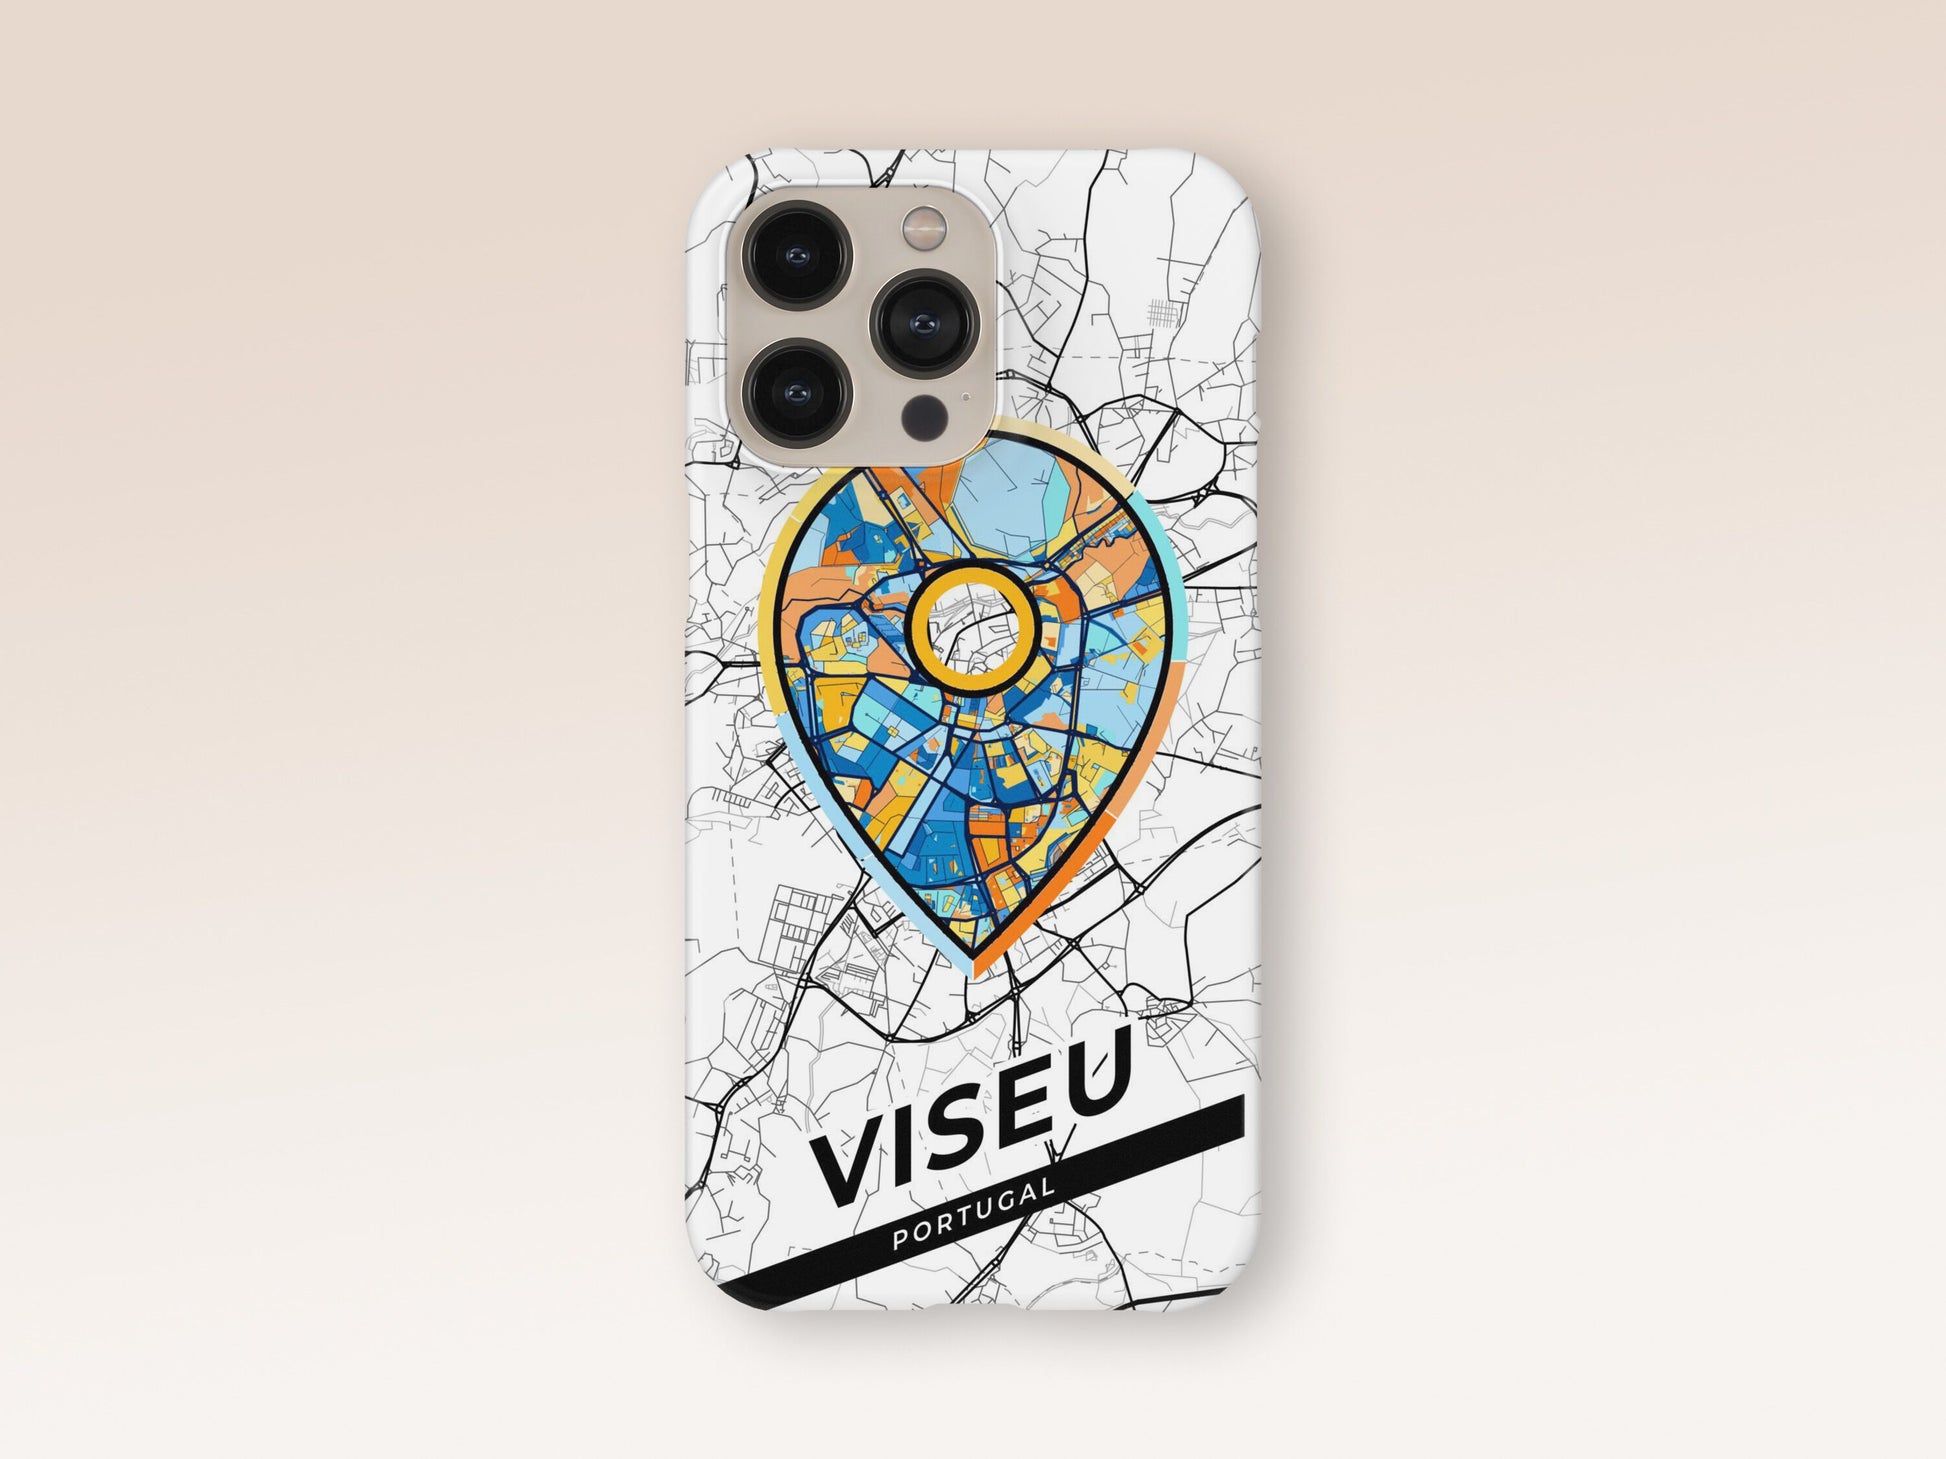 Viseu Portugal slim phone case with colorful icon 1